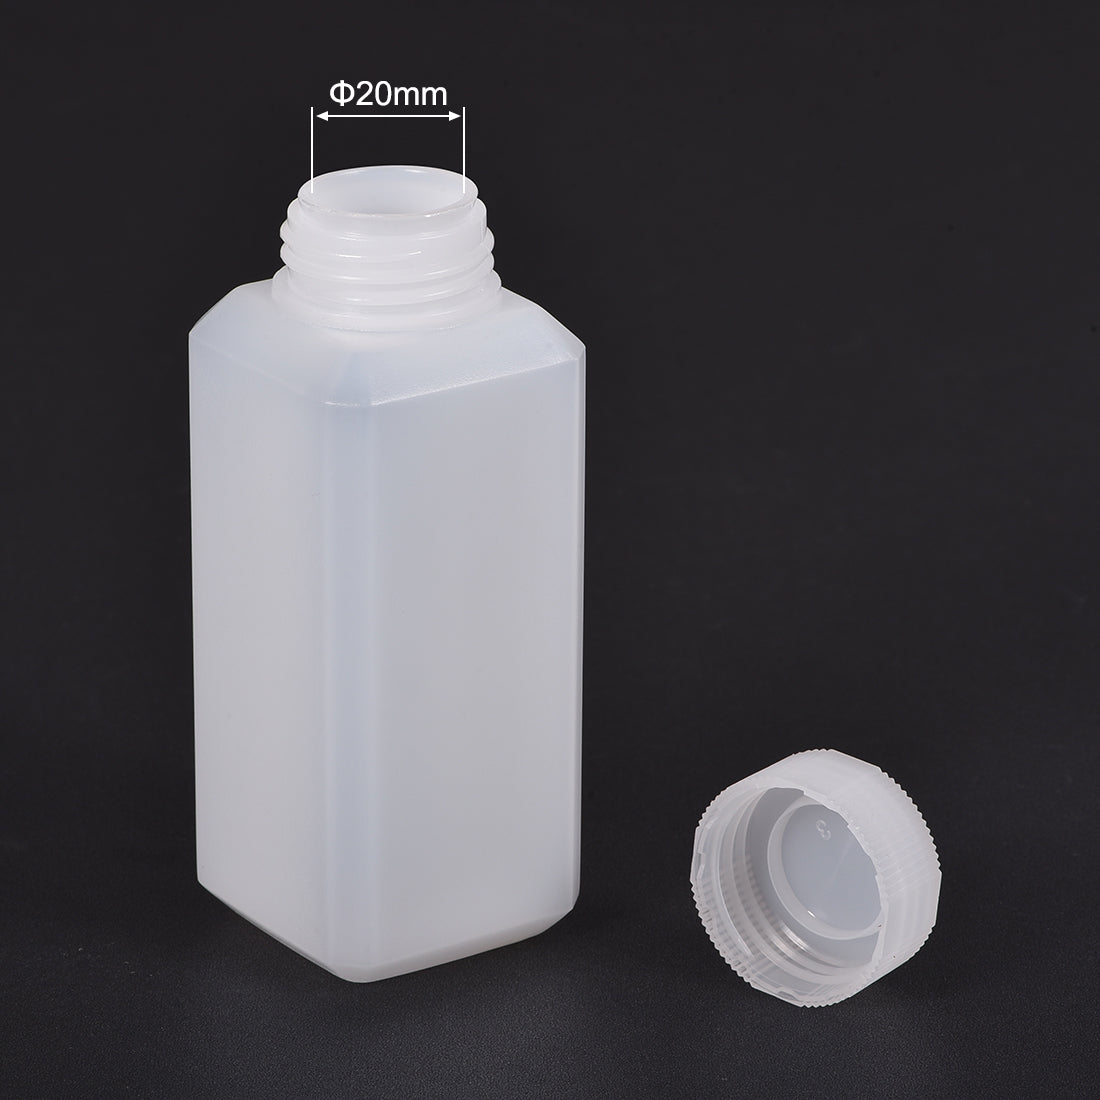 uxcell Uxcell Plastic Lab Chemical Reagent Bottle, 120ml/ 4oz Wide Mouth Sample Sealing Liquid/Solid Storage Bottles, White 10pcs